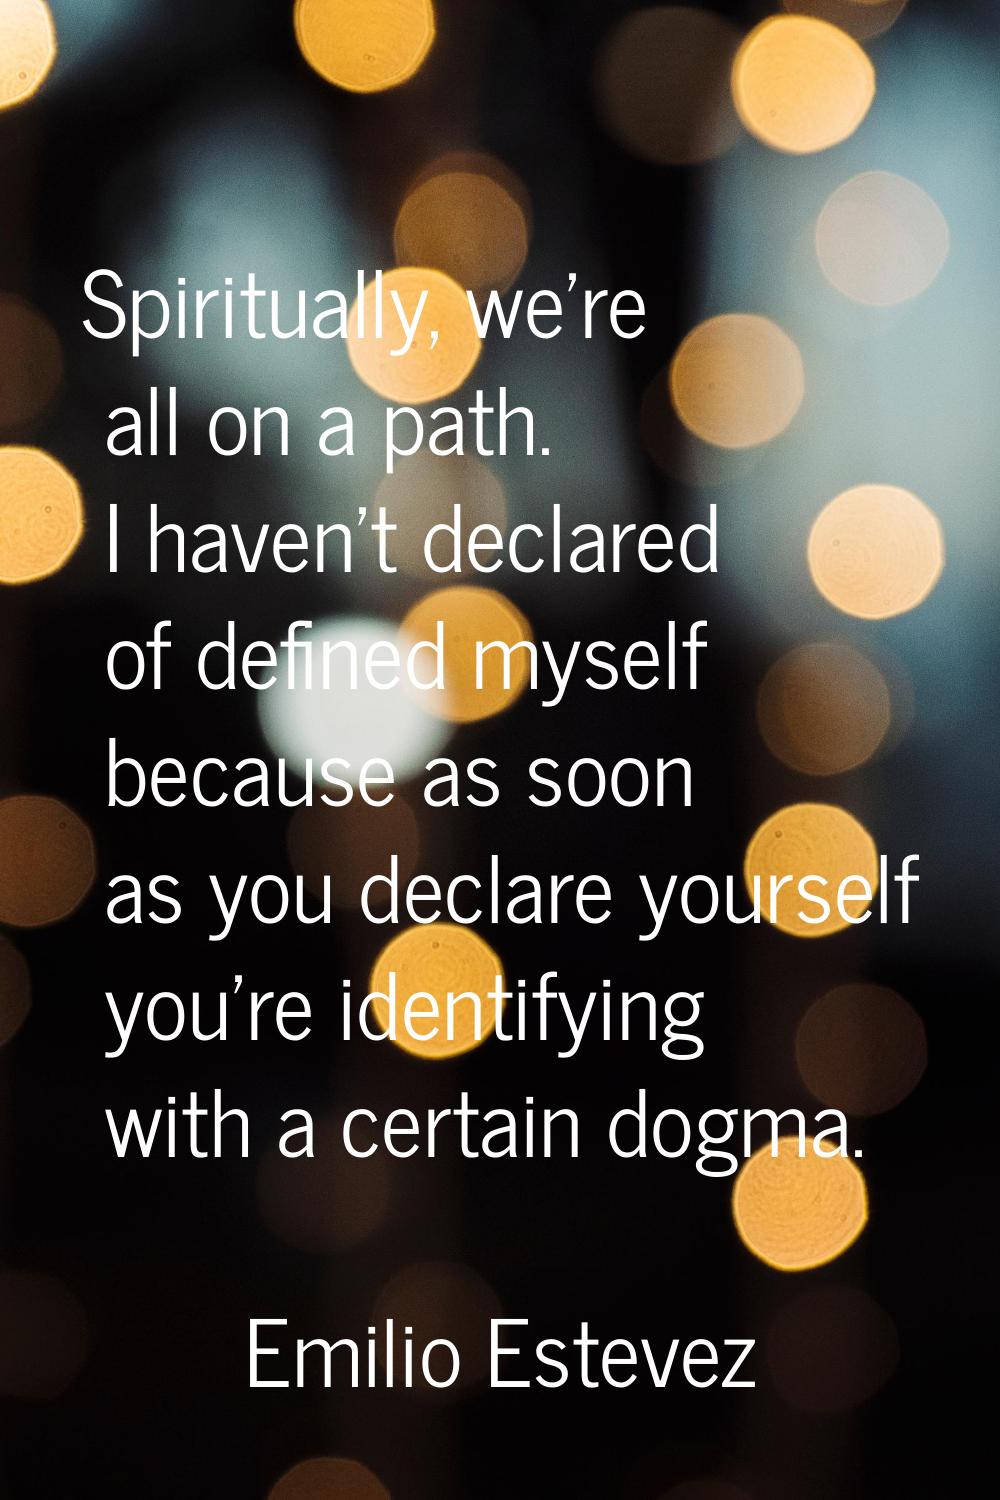 Spiritually, we're all on a path. I haven't declared of defined myself because as soon as you decla